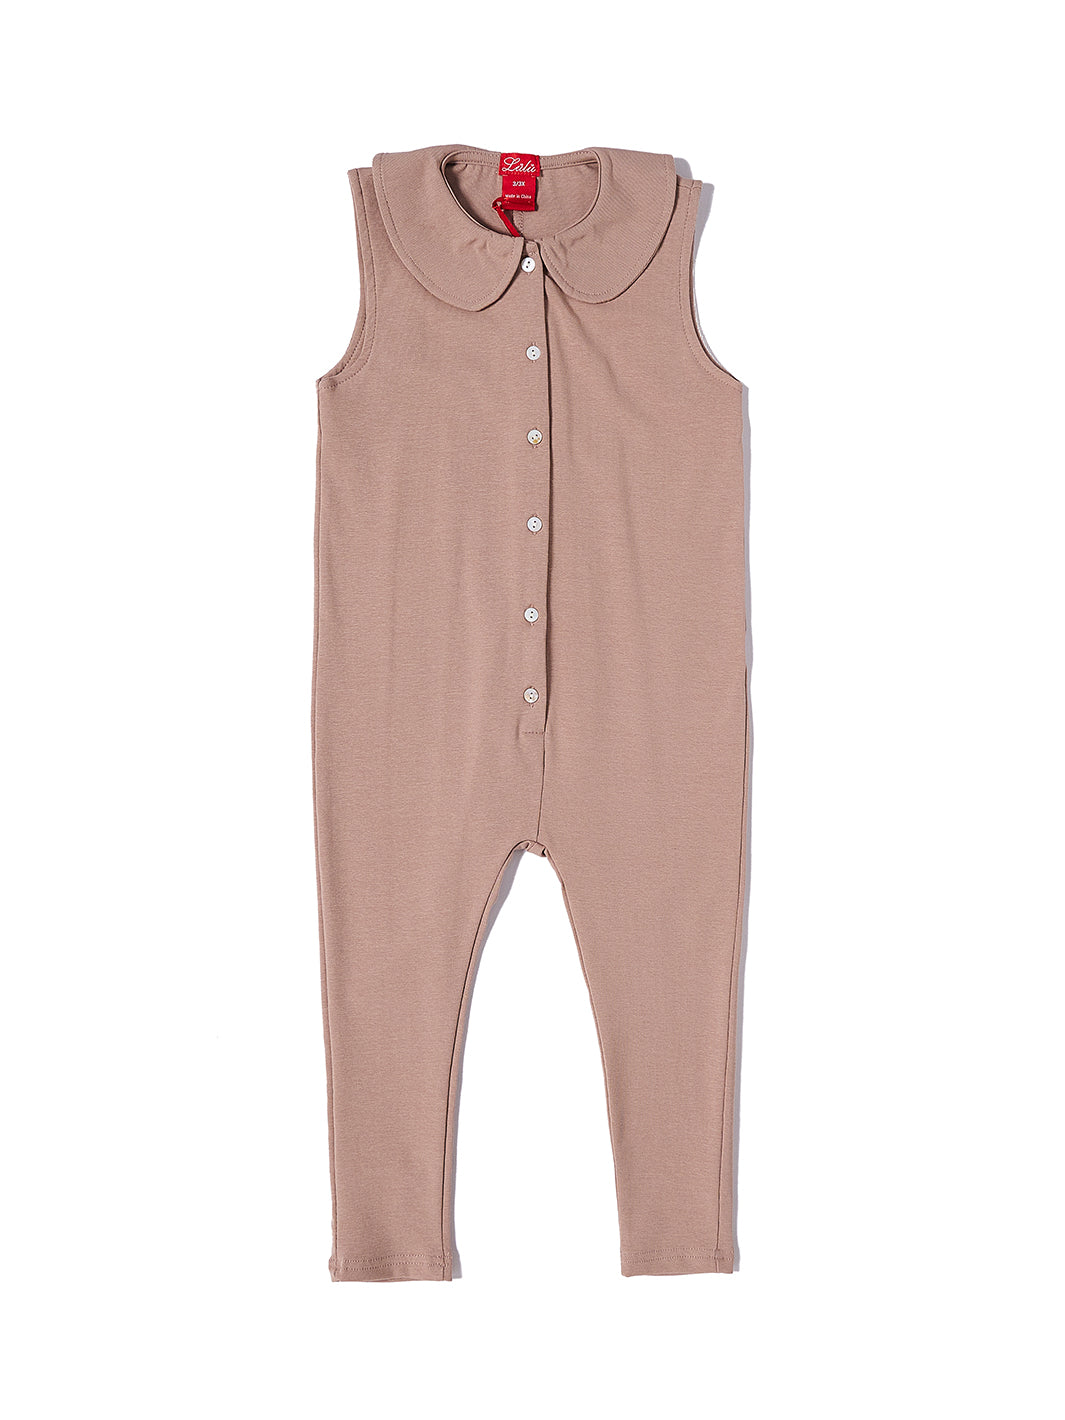 Baby Buttons Overall - Taupe